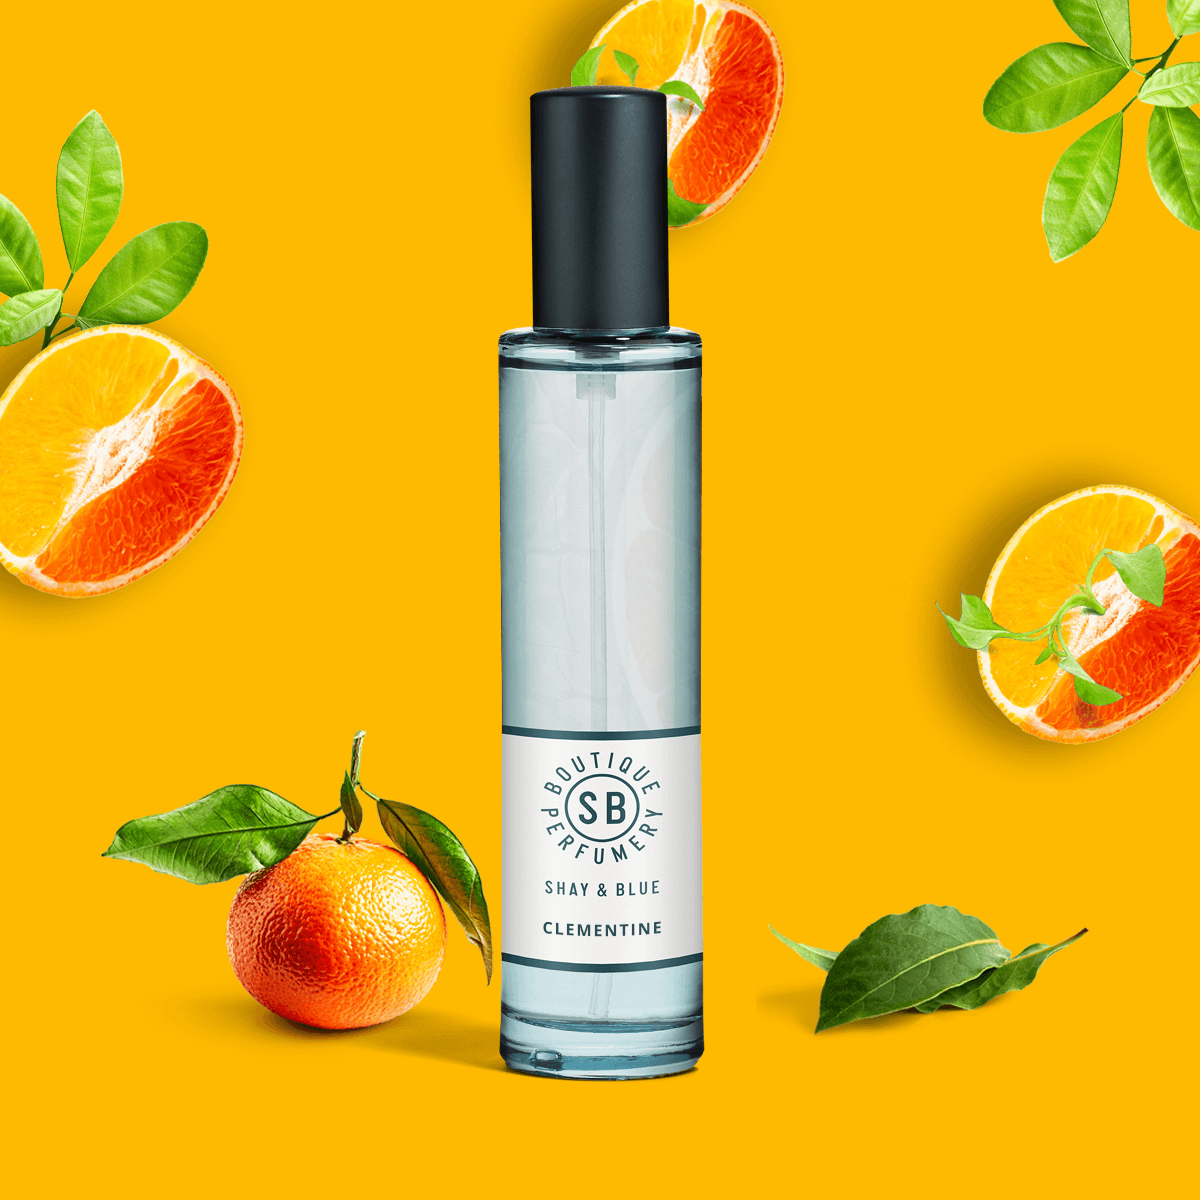 Clementine Fragrance 30ml | Flirty clementine with a bitter freshness of petitgrain and deep laurel woods. | Clean All Gender Fragrance | Shay & Blue